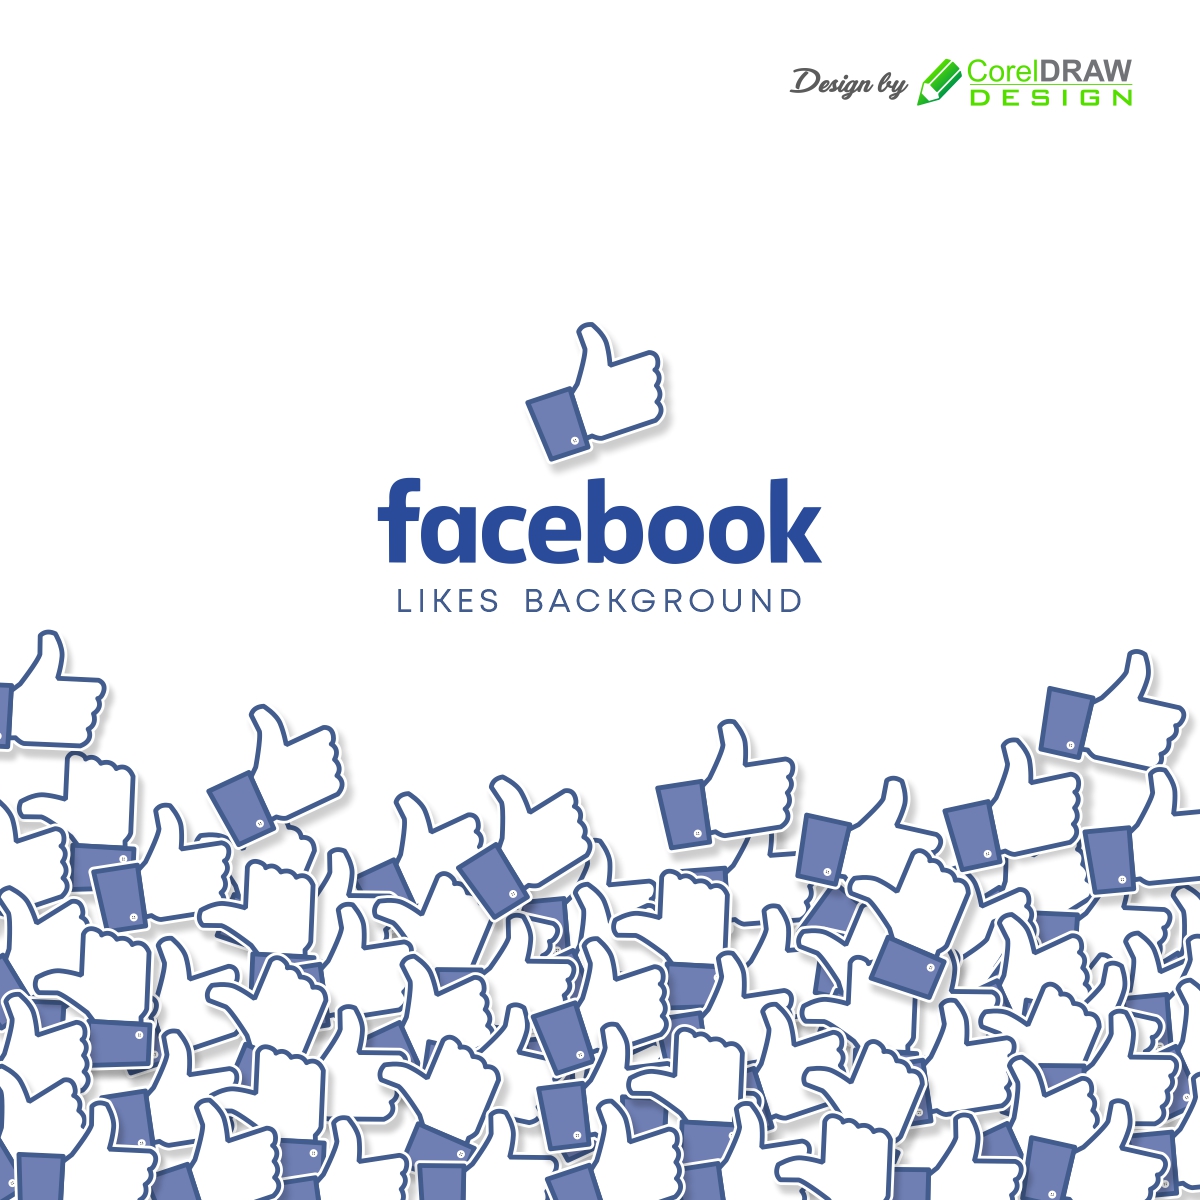 Facebook Background with Likes, Free CDR